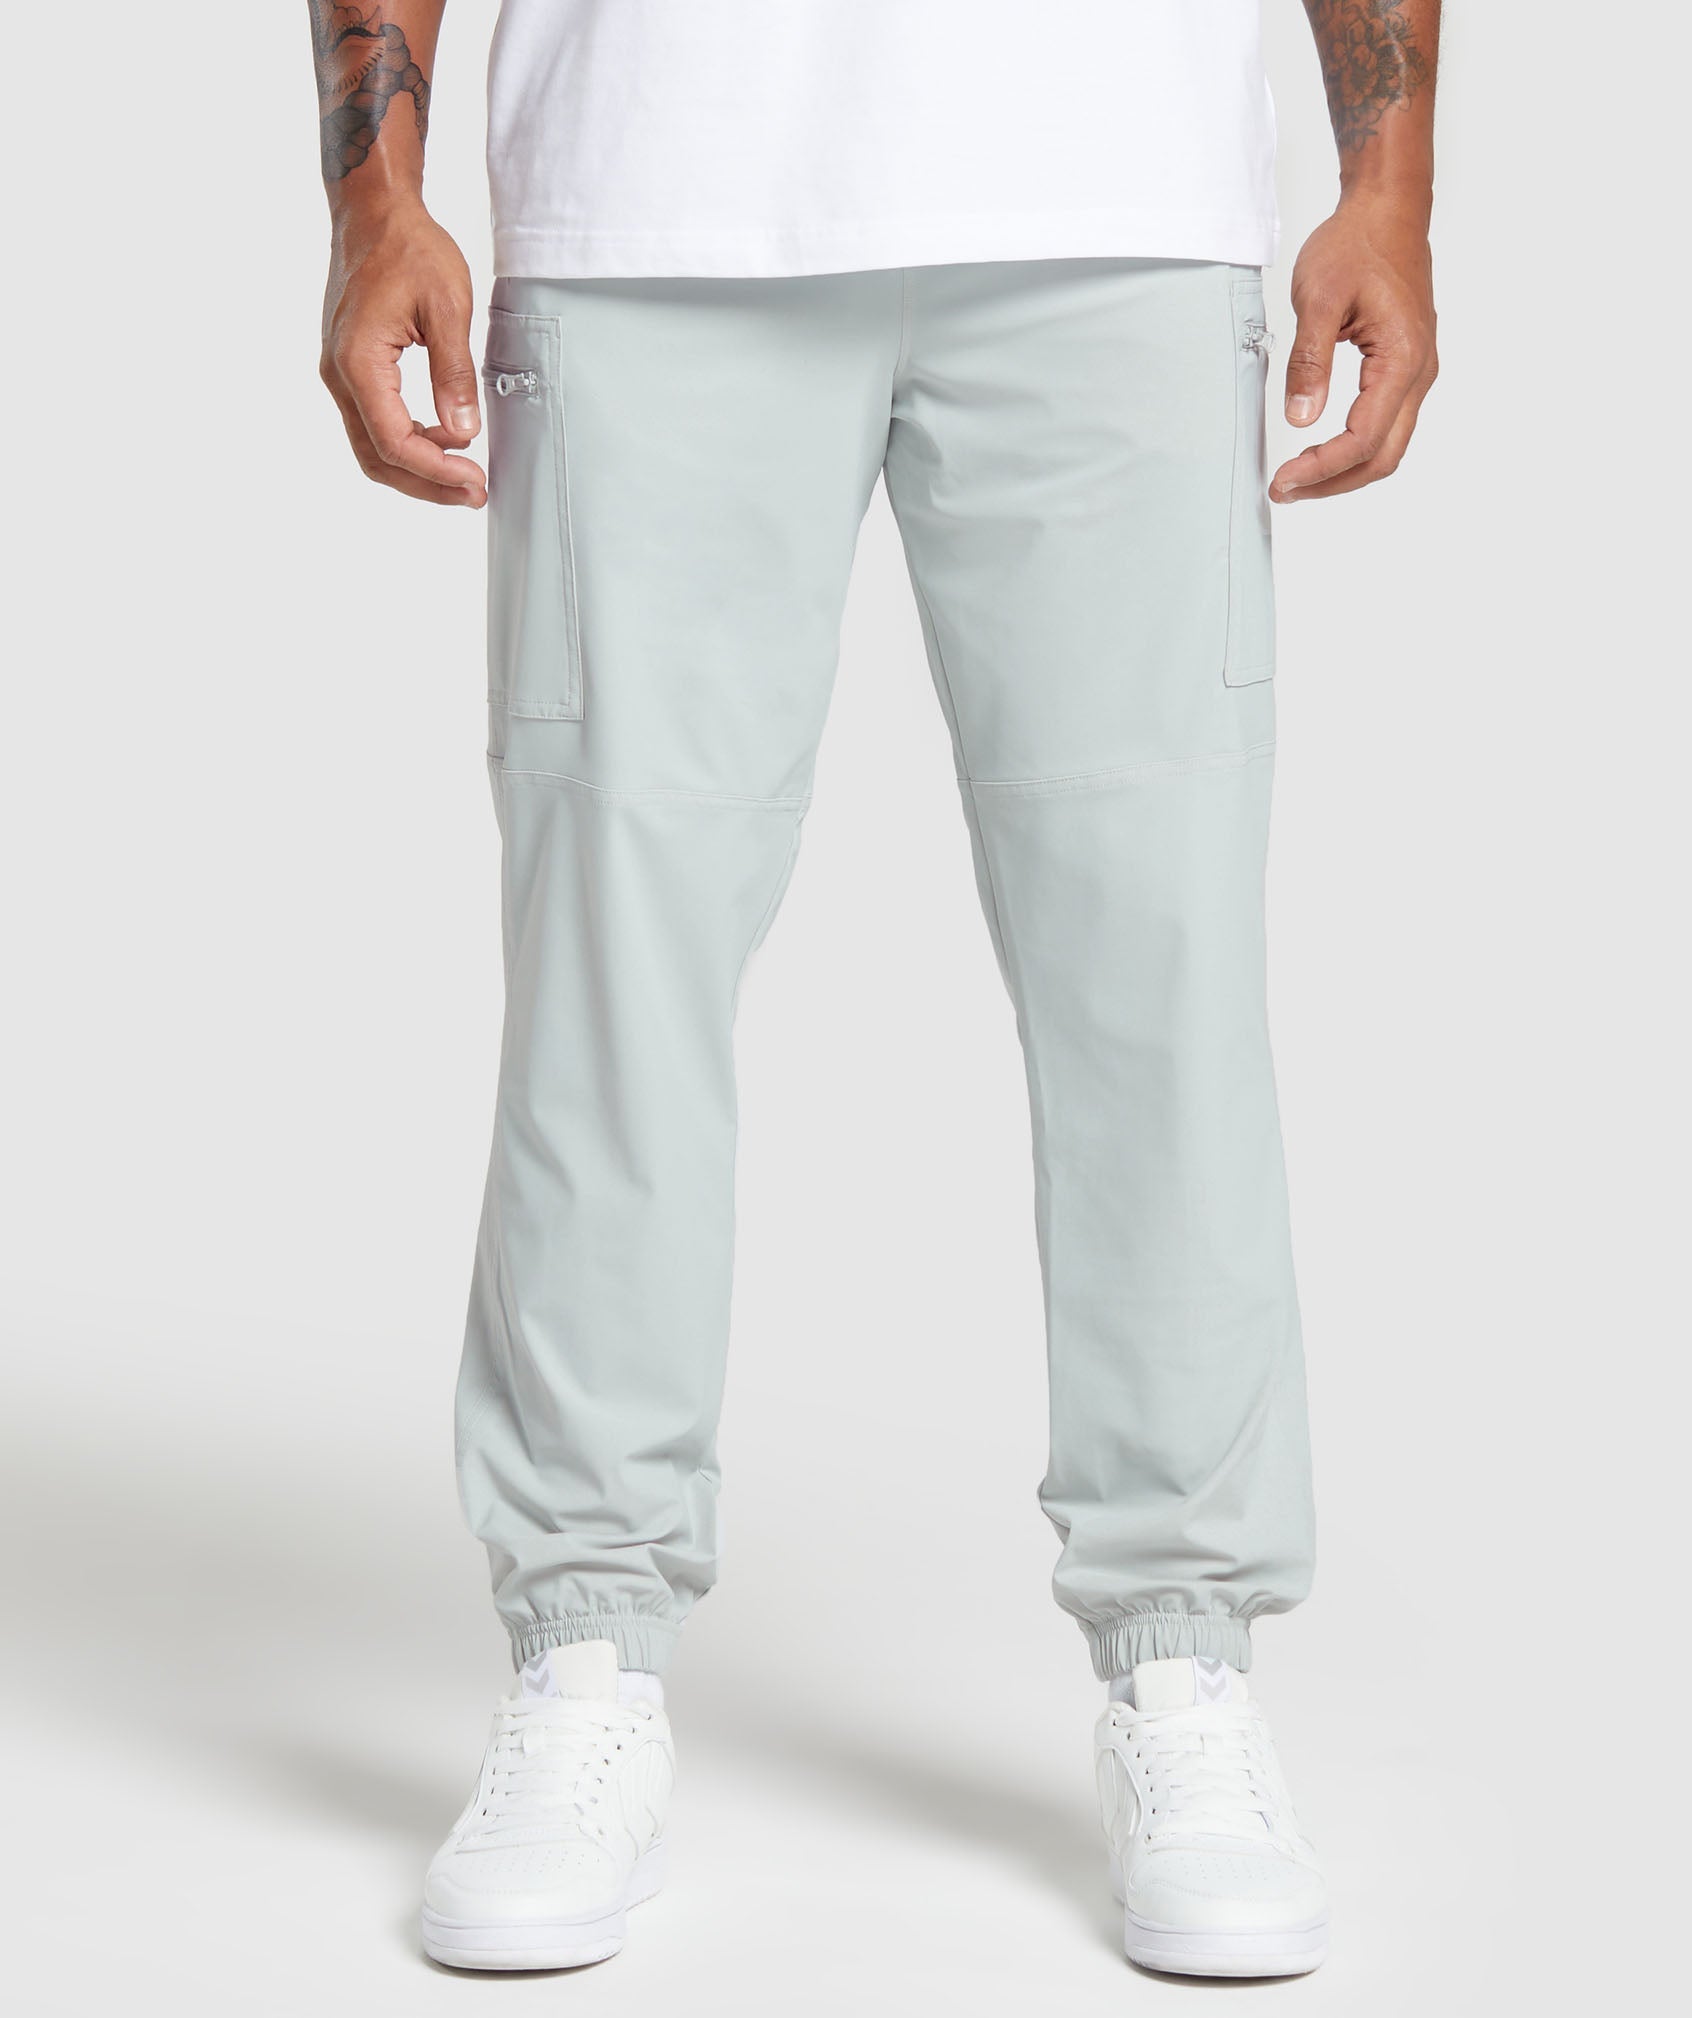 Rest Day Cargo Pants in Light Grey - view 2